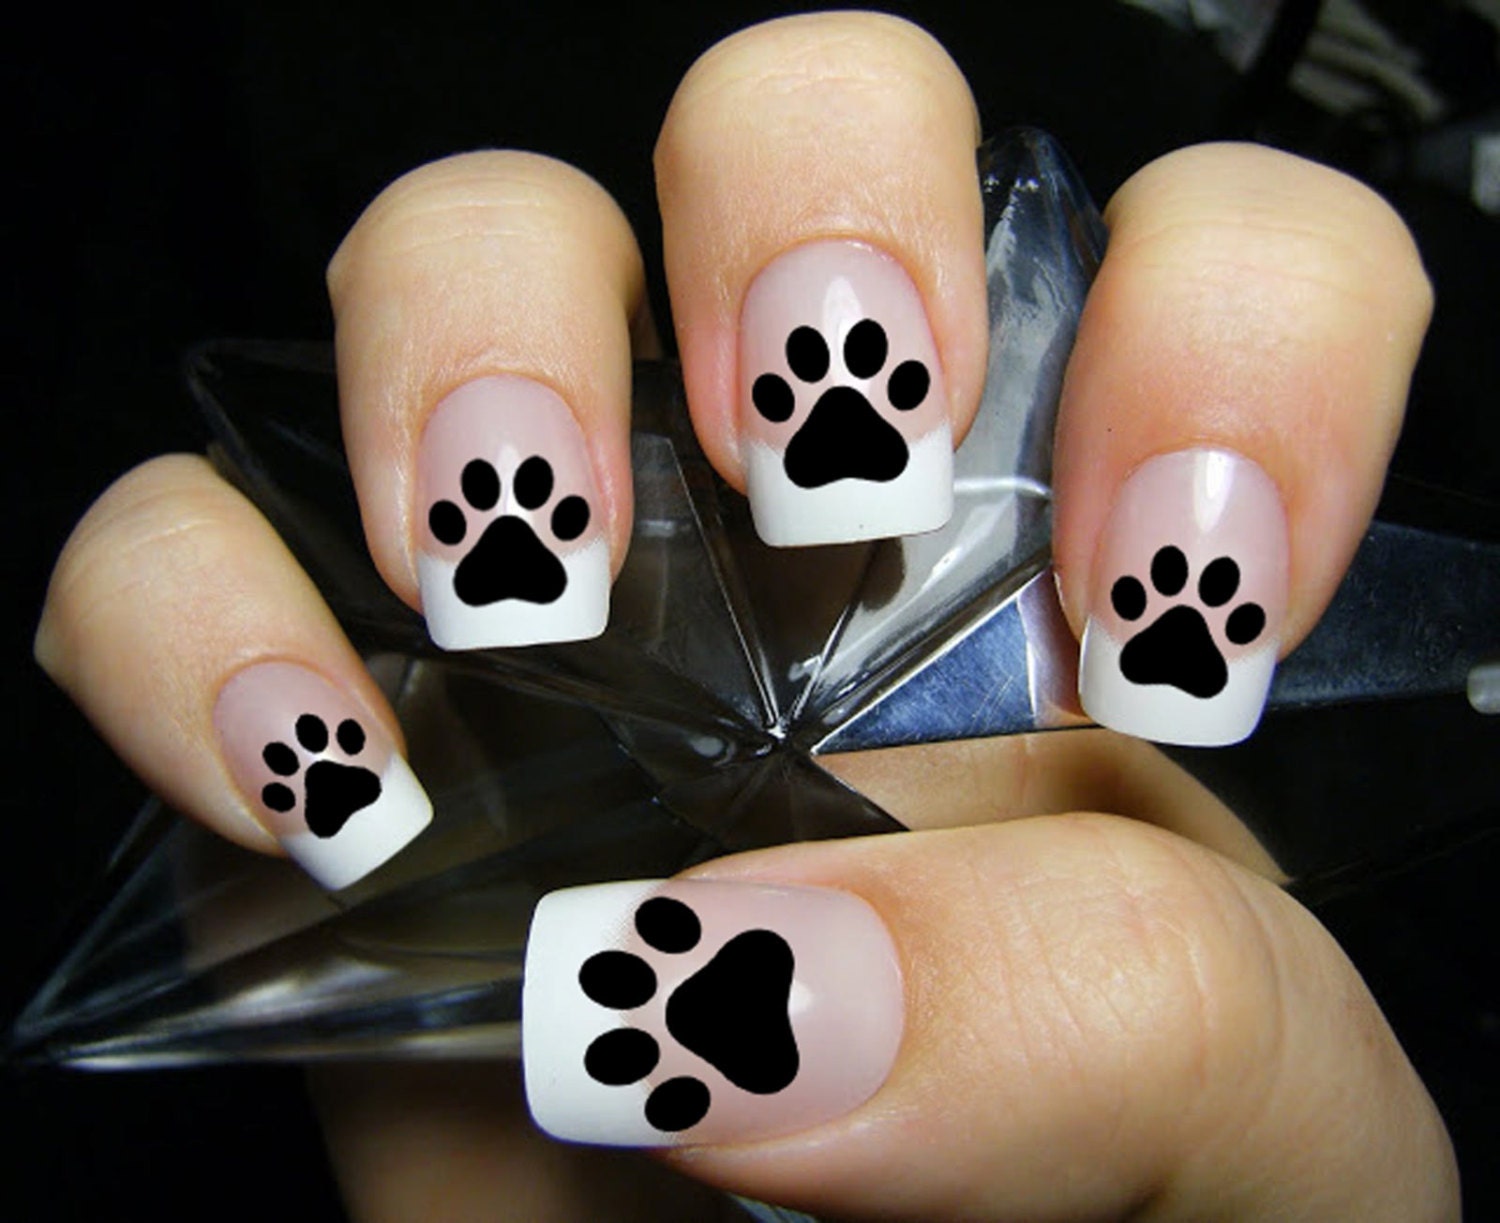 2. Simple Paw Print Toe Nail Design - wide 2